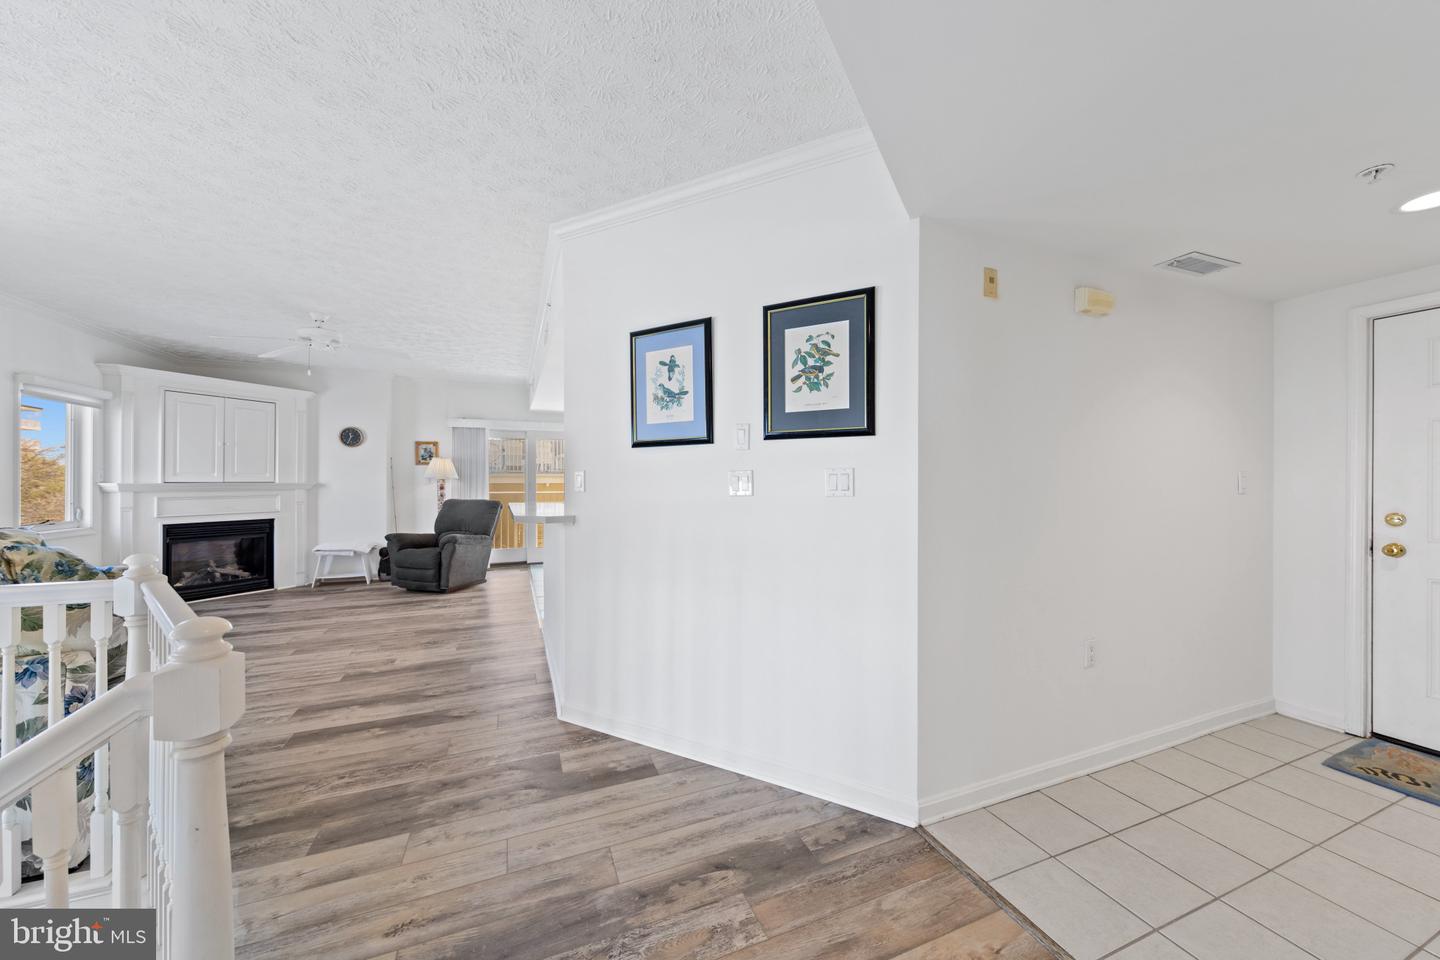 MDWO2015322-802986556008-2024-04-16-15-31-32 14 45th St #203 | Ocean City, MD Real Estate For Sale | MLS# Mdwo2015322  - 1st Choice Properties